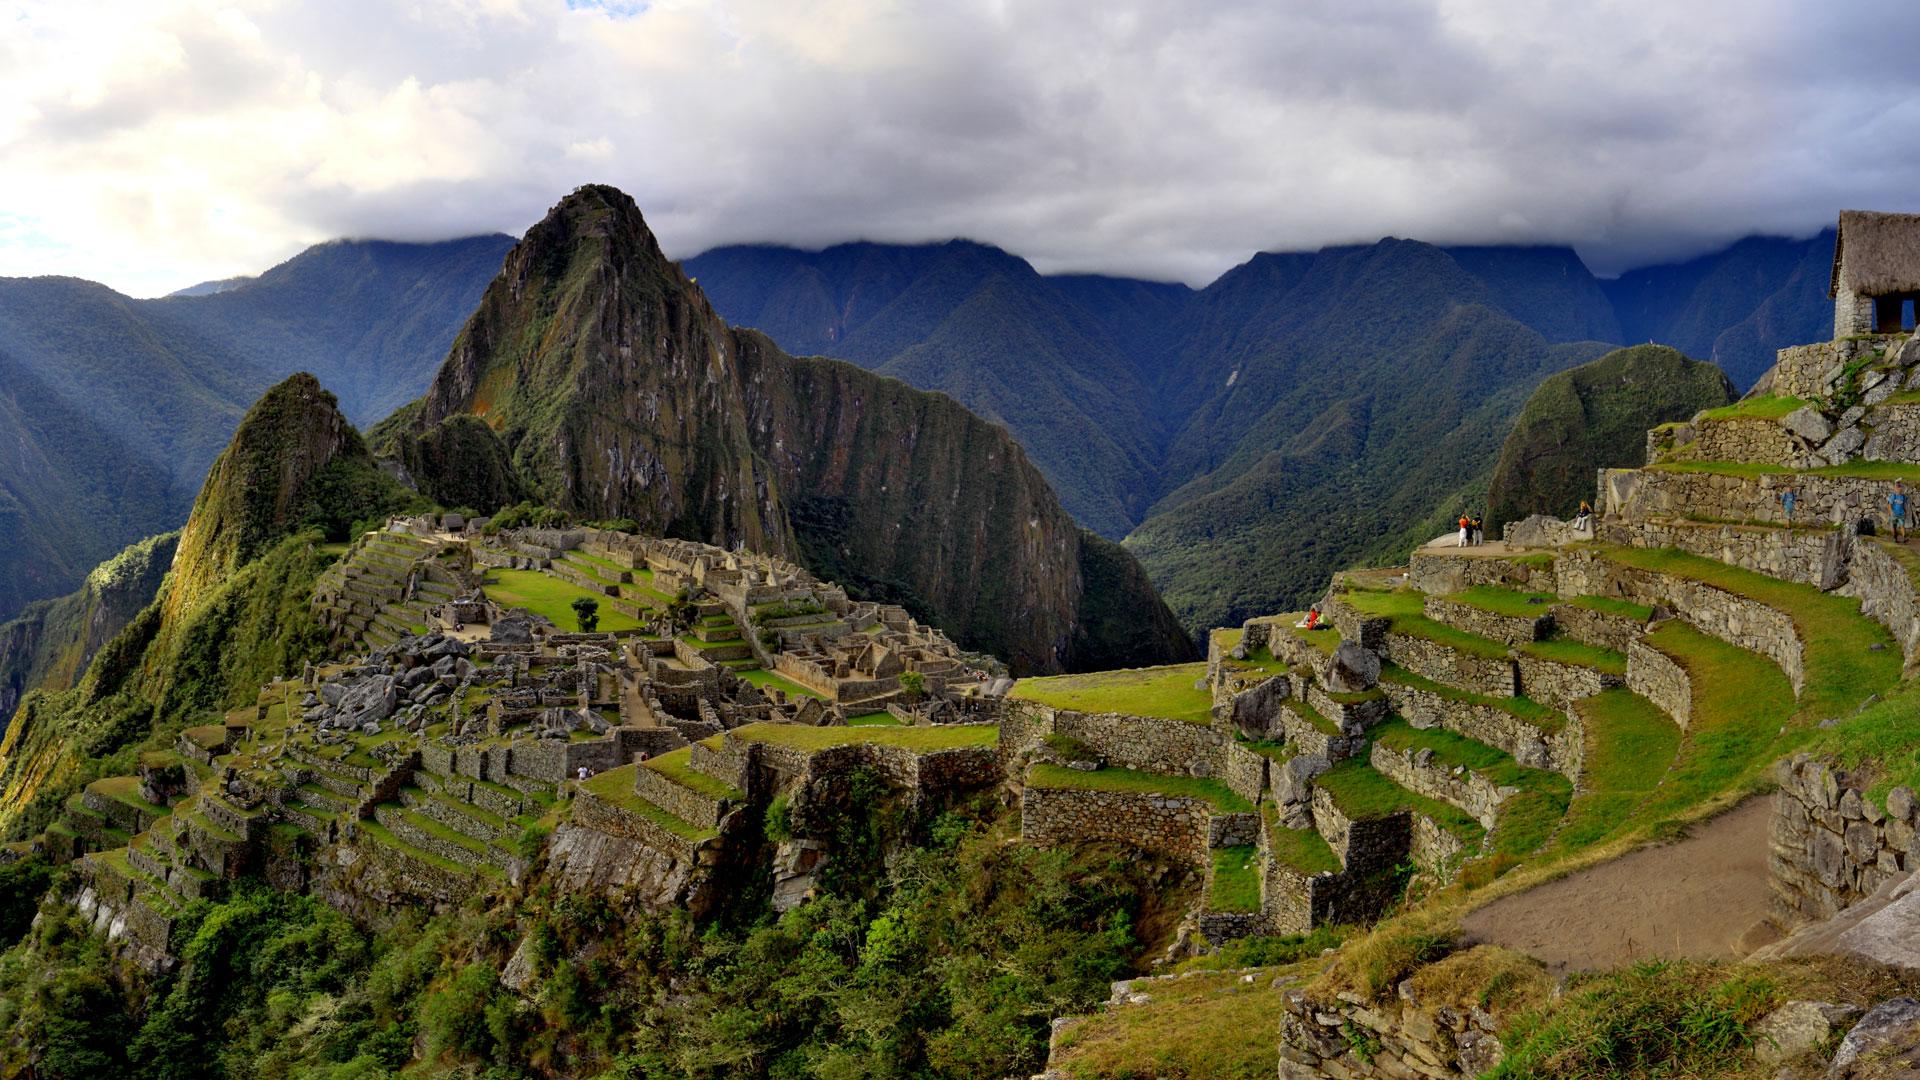 How difficult is the Inca Trail to Machu Picchu?